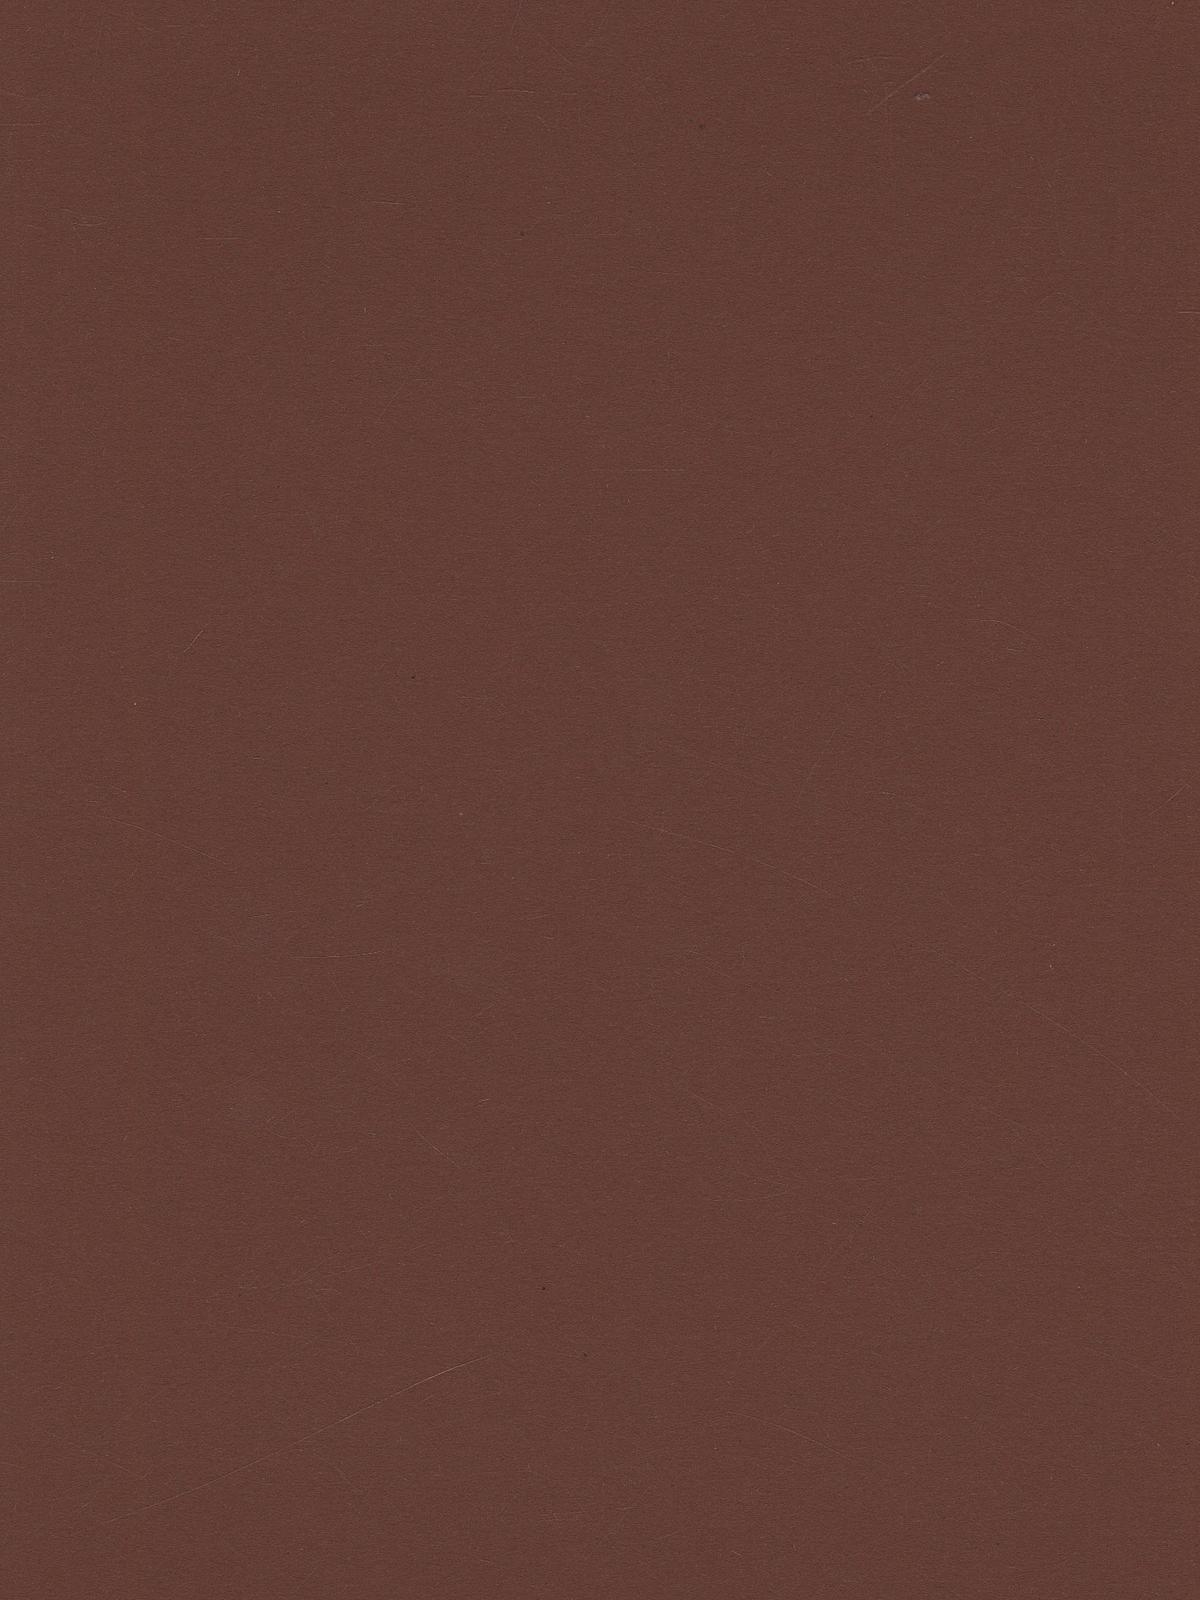 Art Card Chocolate Brown 8.5 In. X 11 In.